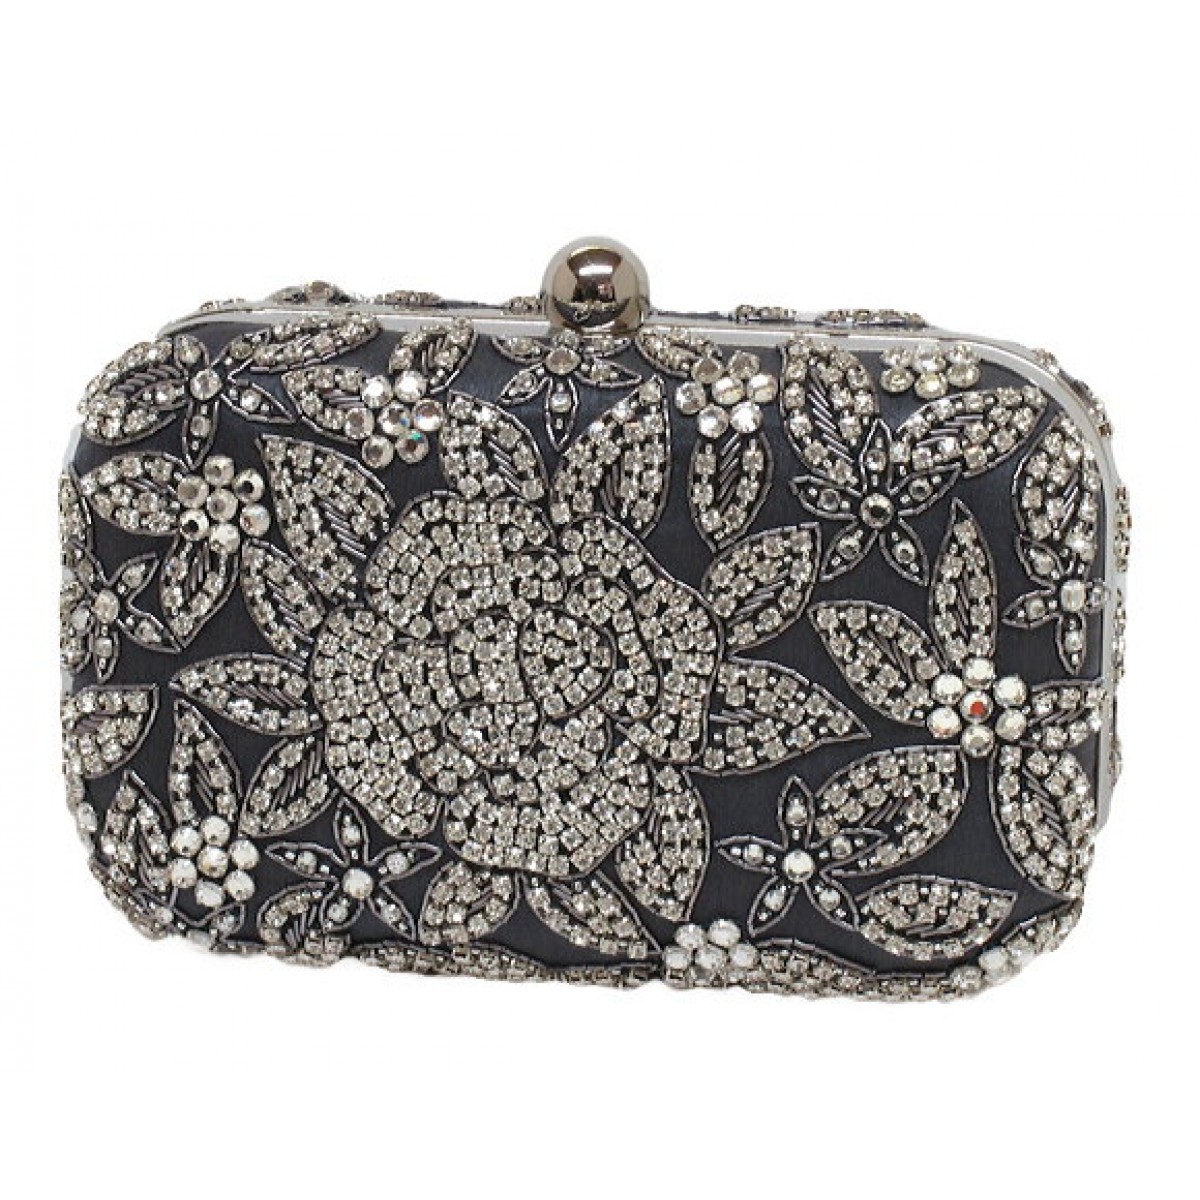 Box Bag with Floral Crystal Design